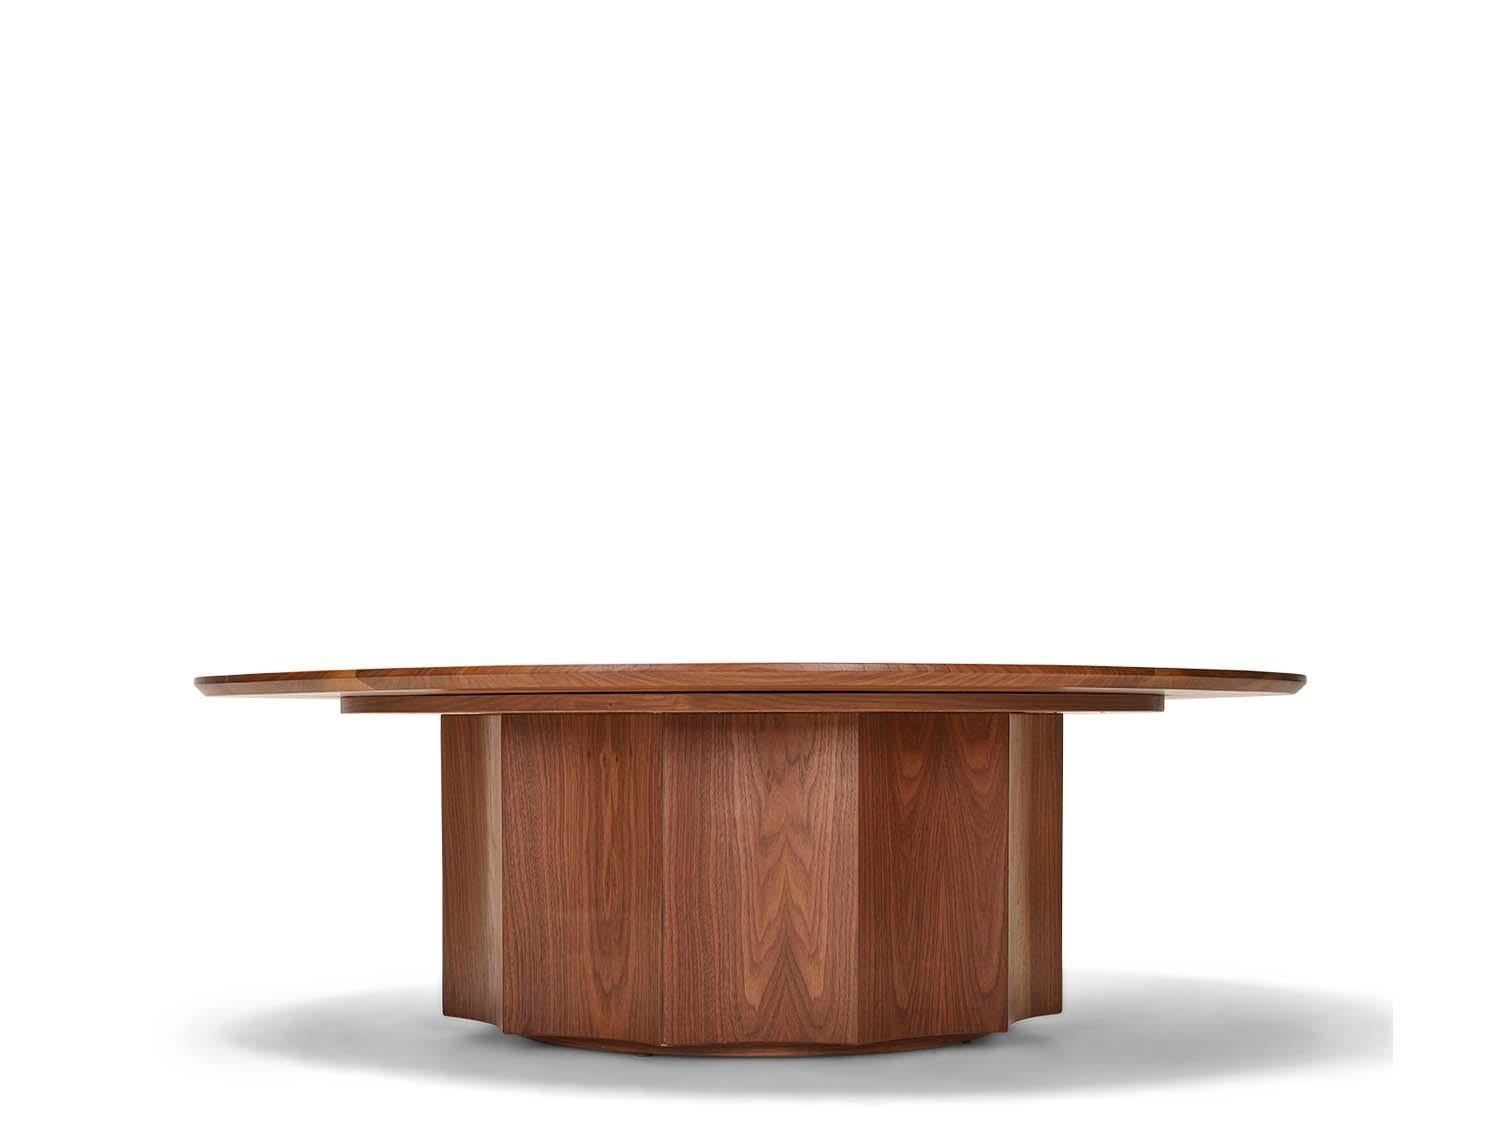 The Normandie cocktail table with wood top is a variation of our stone top Normandie Cocktail table. It features an American walnut or white oak fluted base with a sturdy wood top. Available in three sizes. 

The Lawson-Fenning Collection is